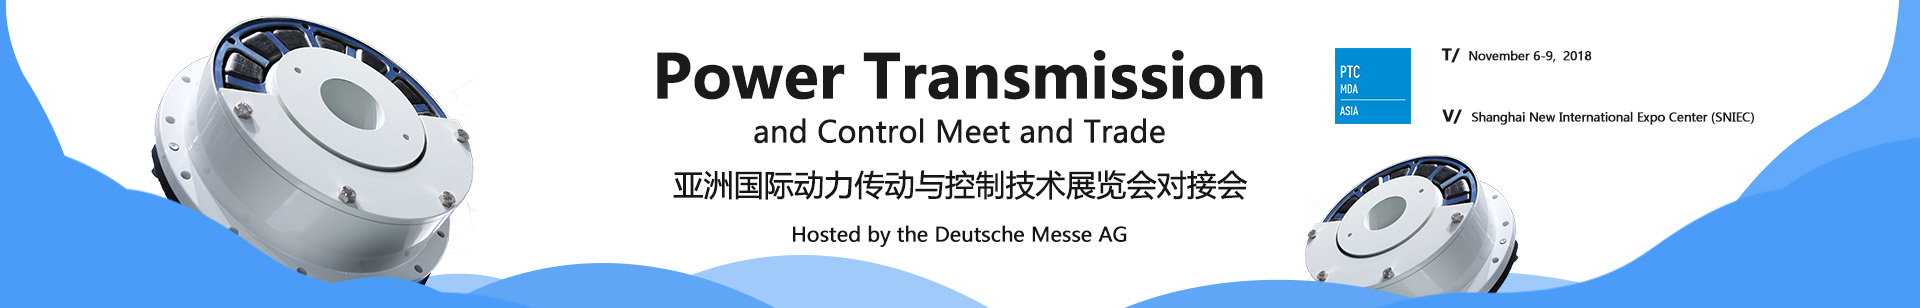 Power Transmission and Control Meet and Trade